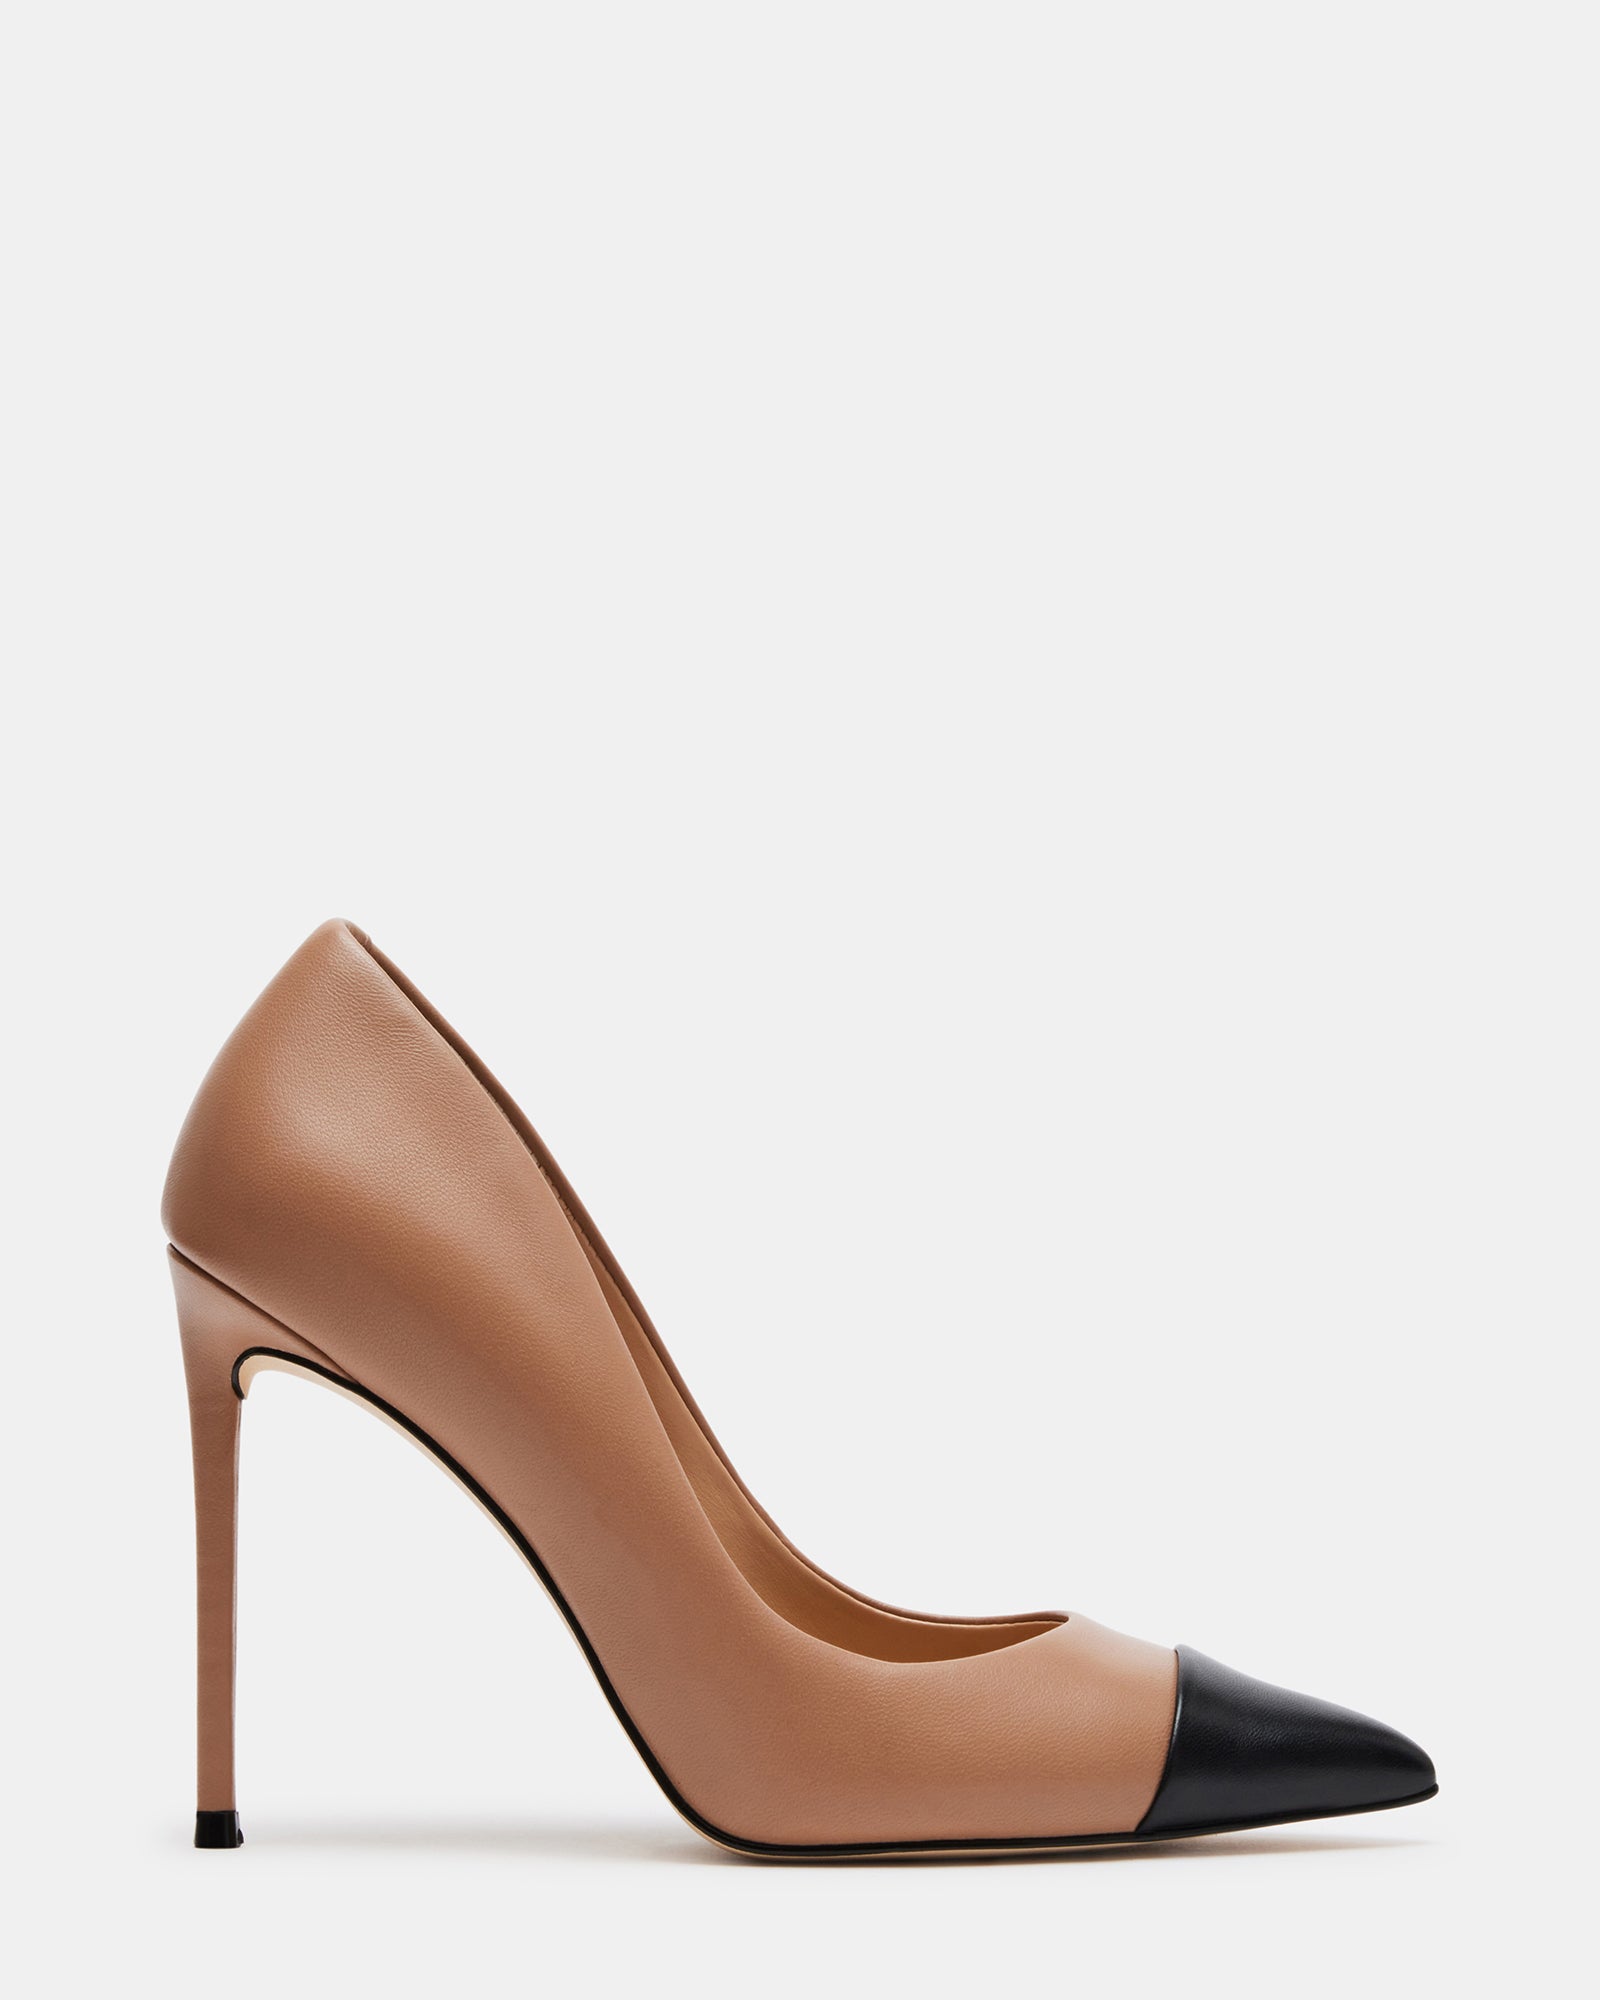 EVELYN Blush Patent Point Toe Pump